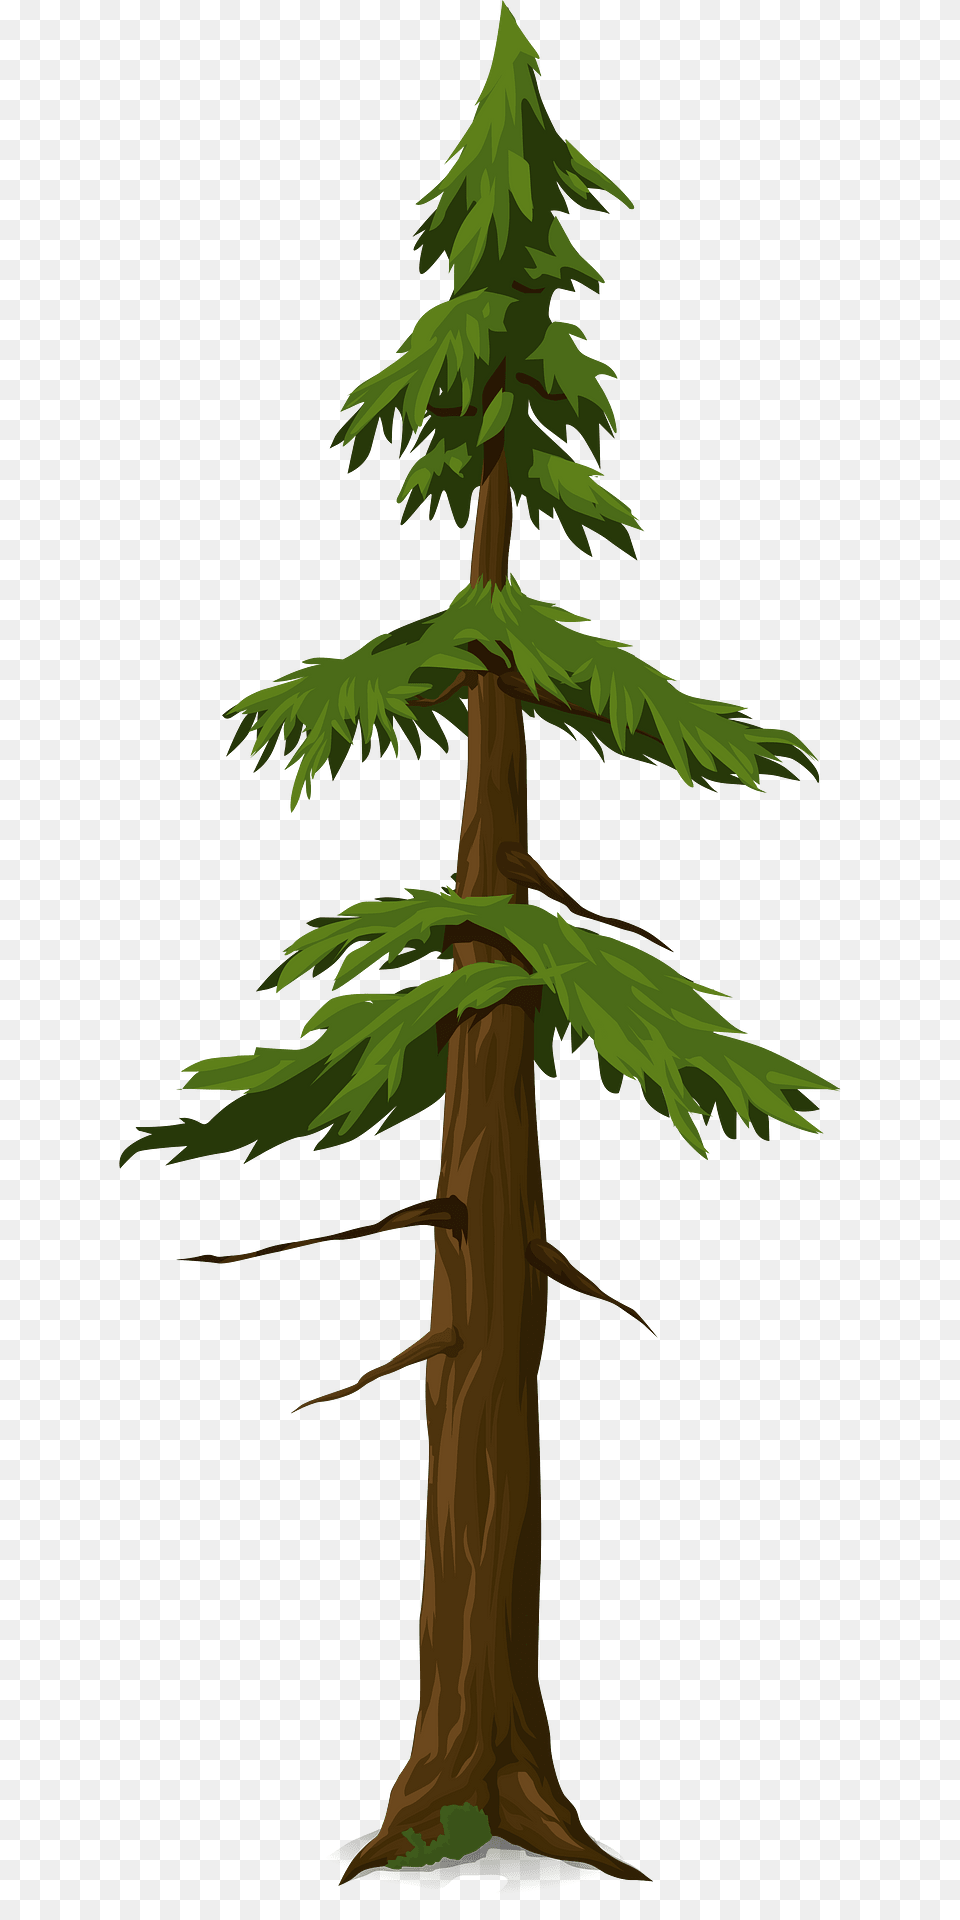 Green Coniferous Tree Clipart, Conifer, Plant, Fir, Pine Png Image